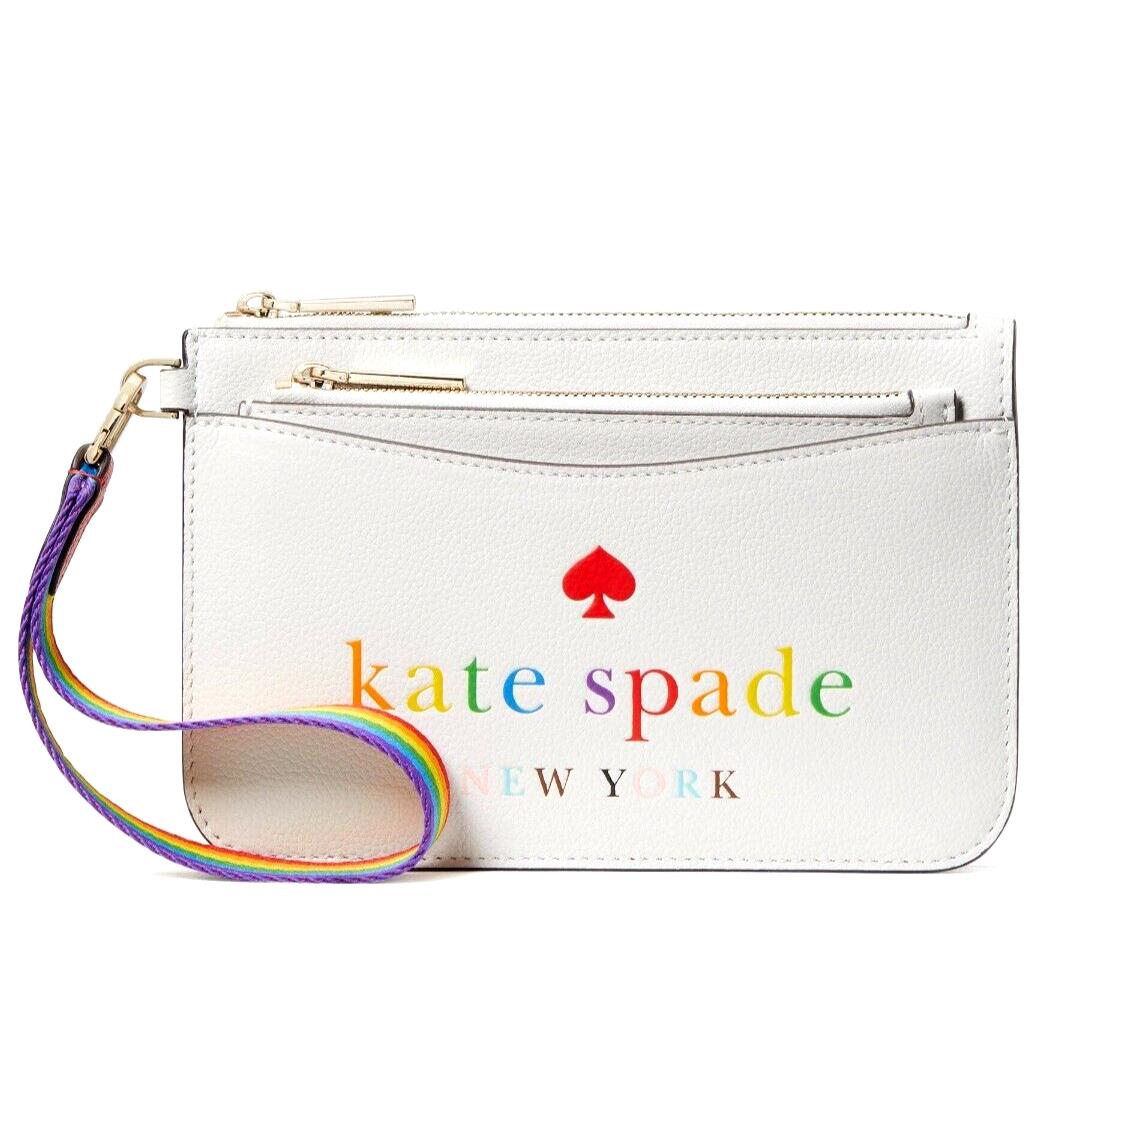 New Kate Spade All Love Wristlet Set 3-in-1 Rainbow White Multi with Dust Bag